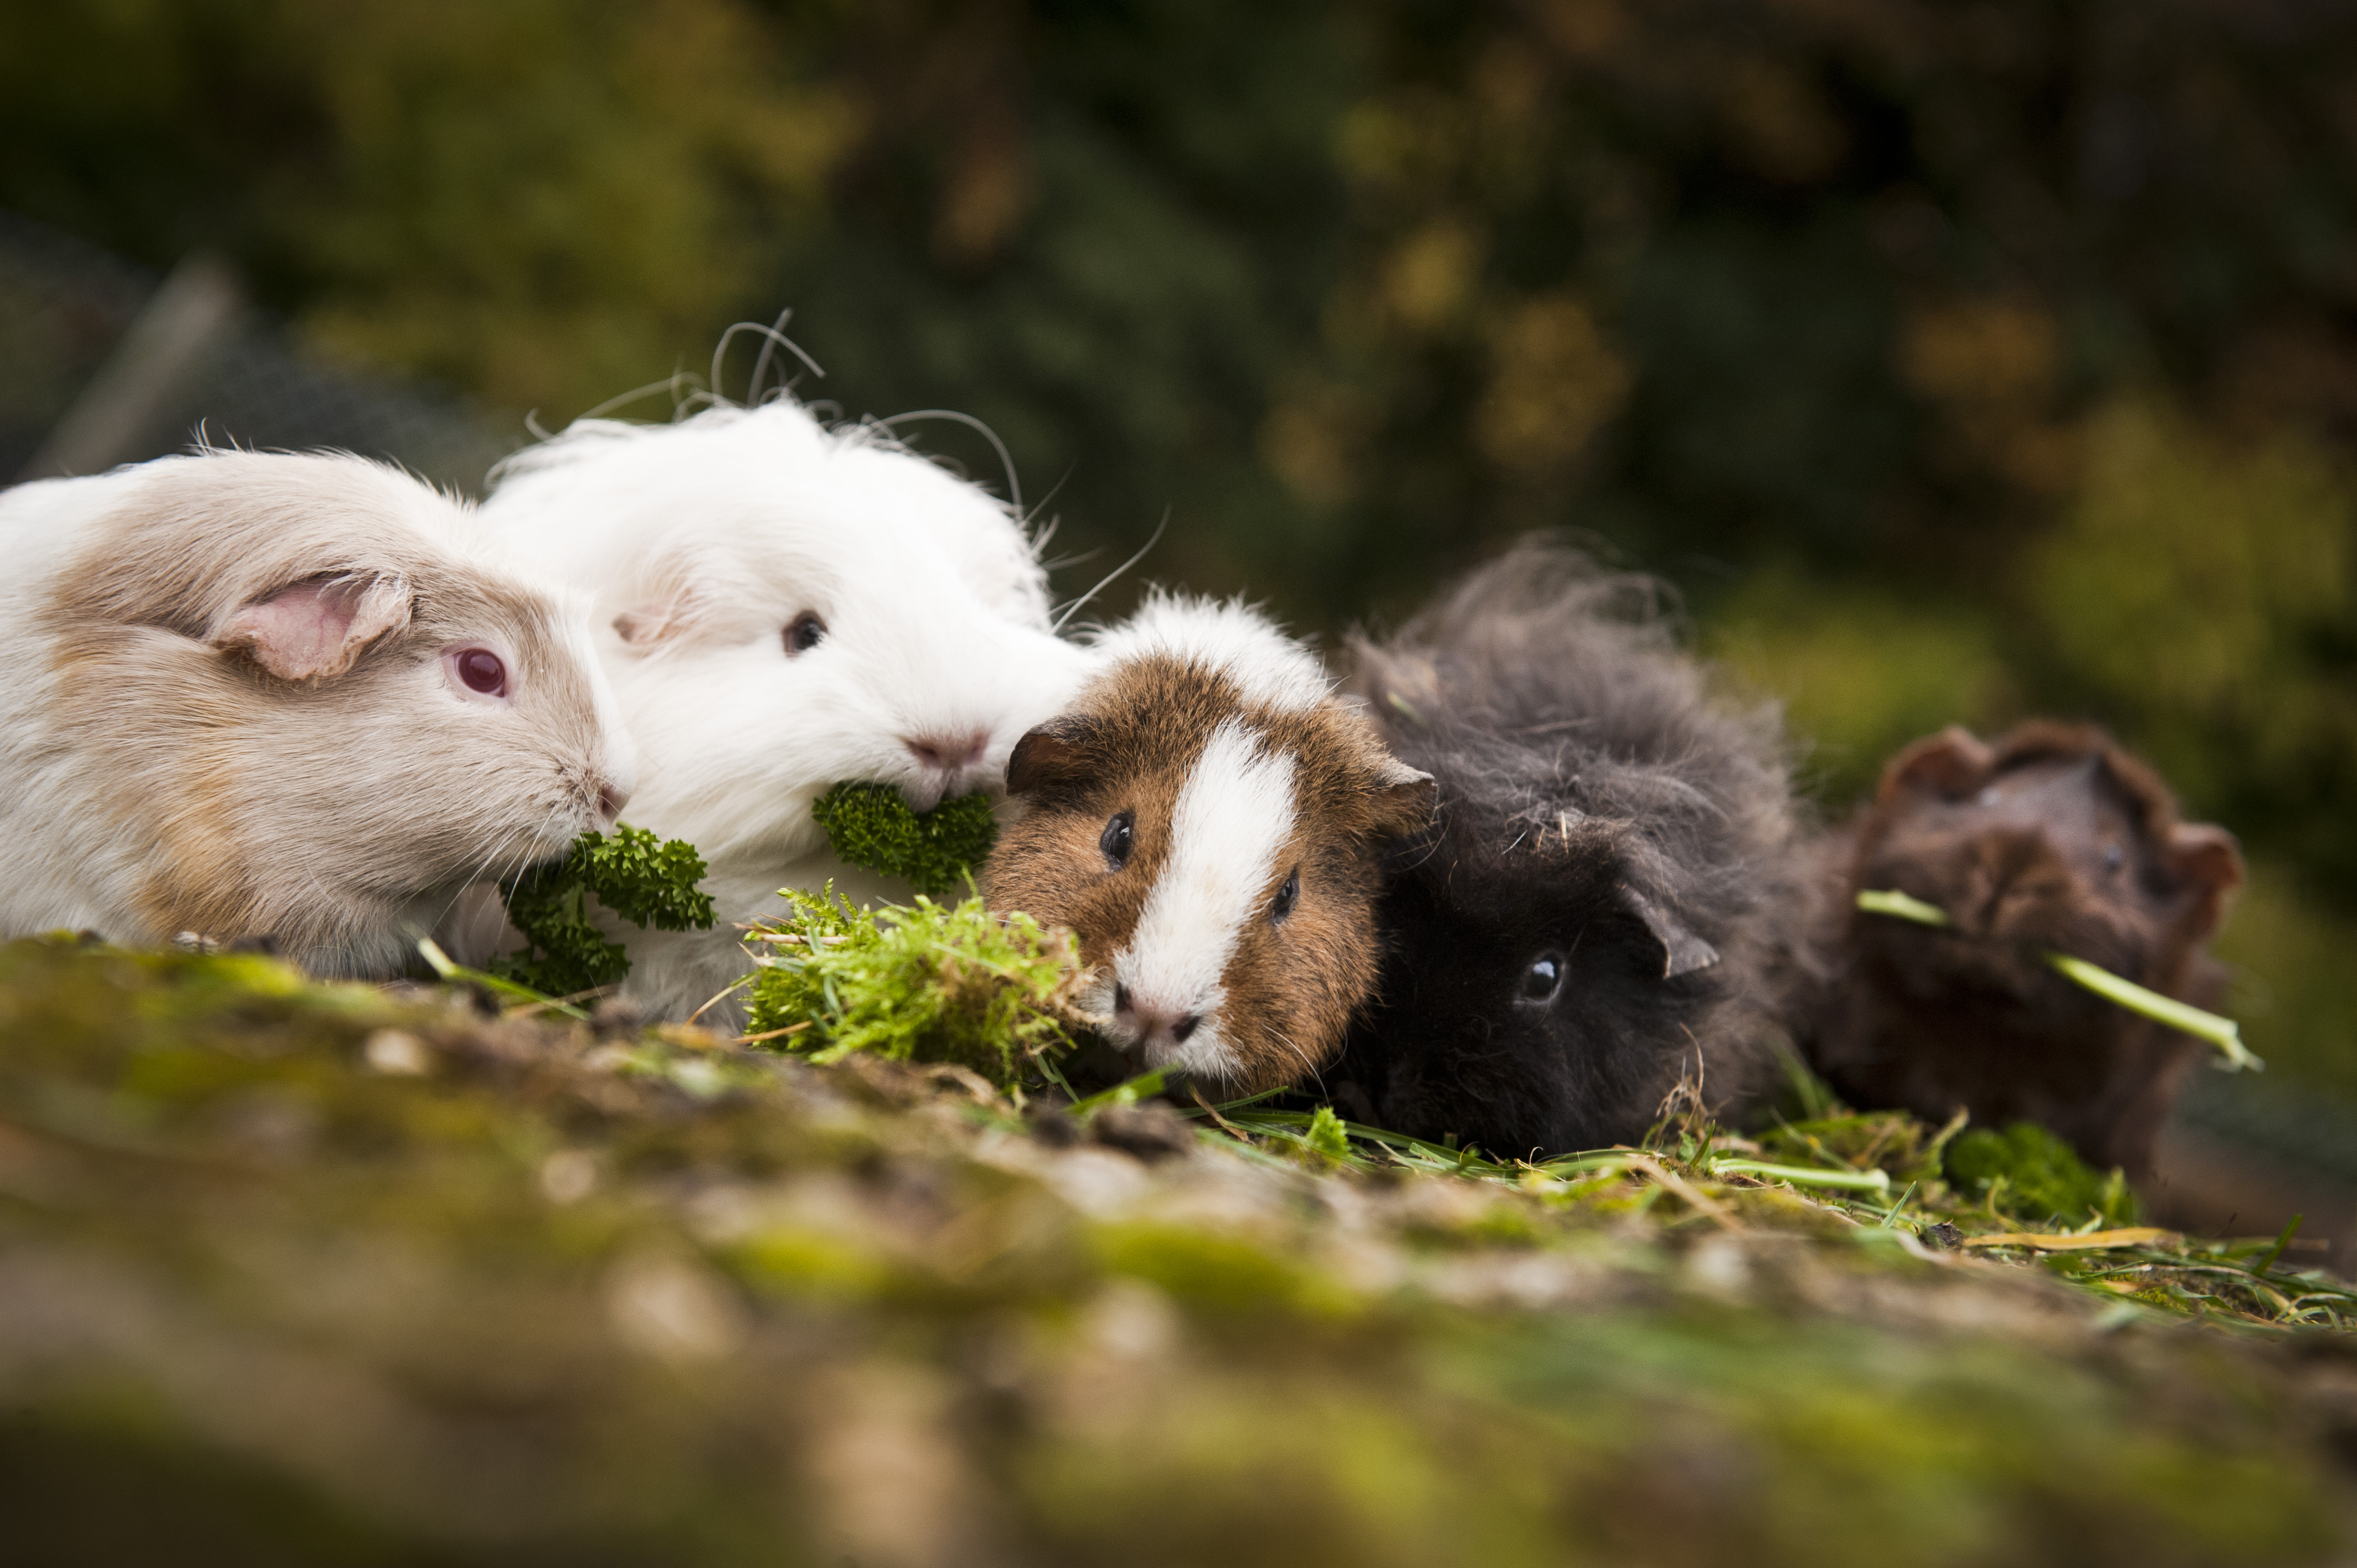 A herd of guinea pigs eating together outdoors.